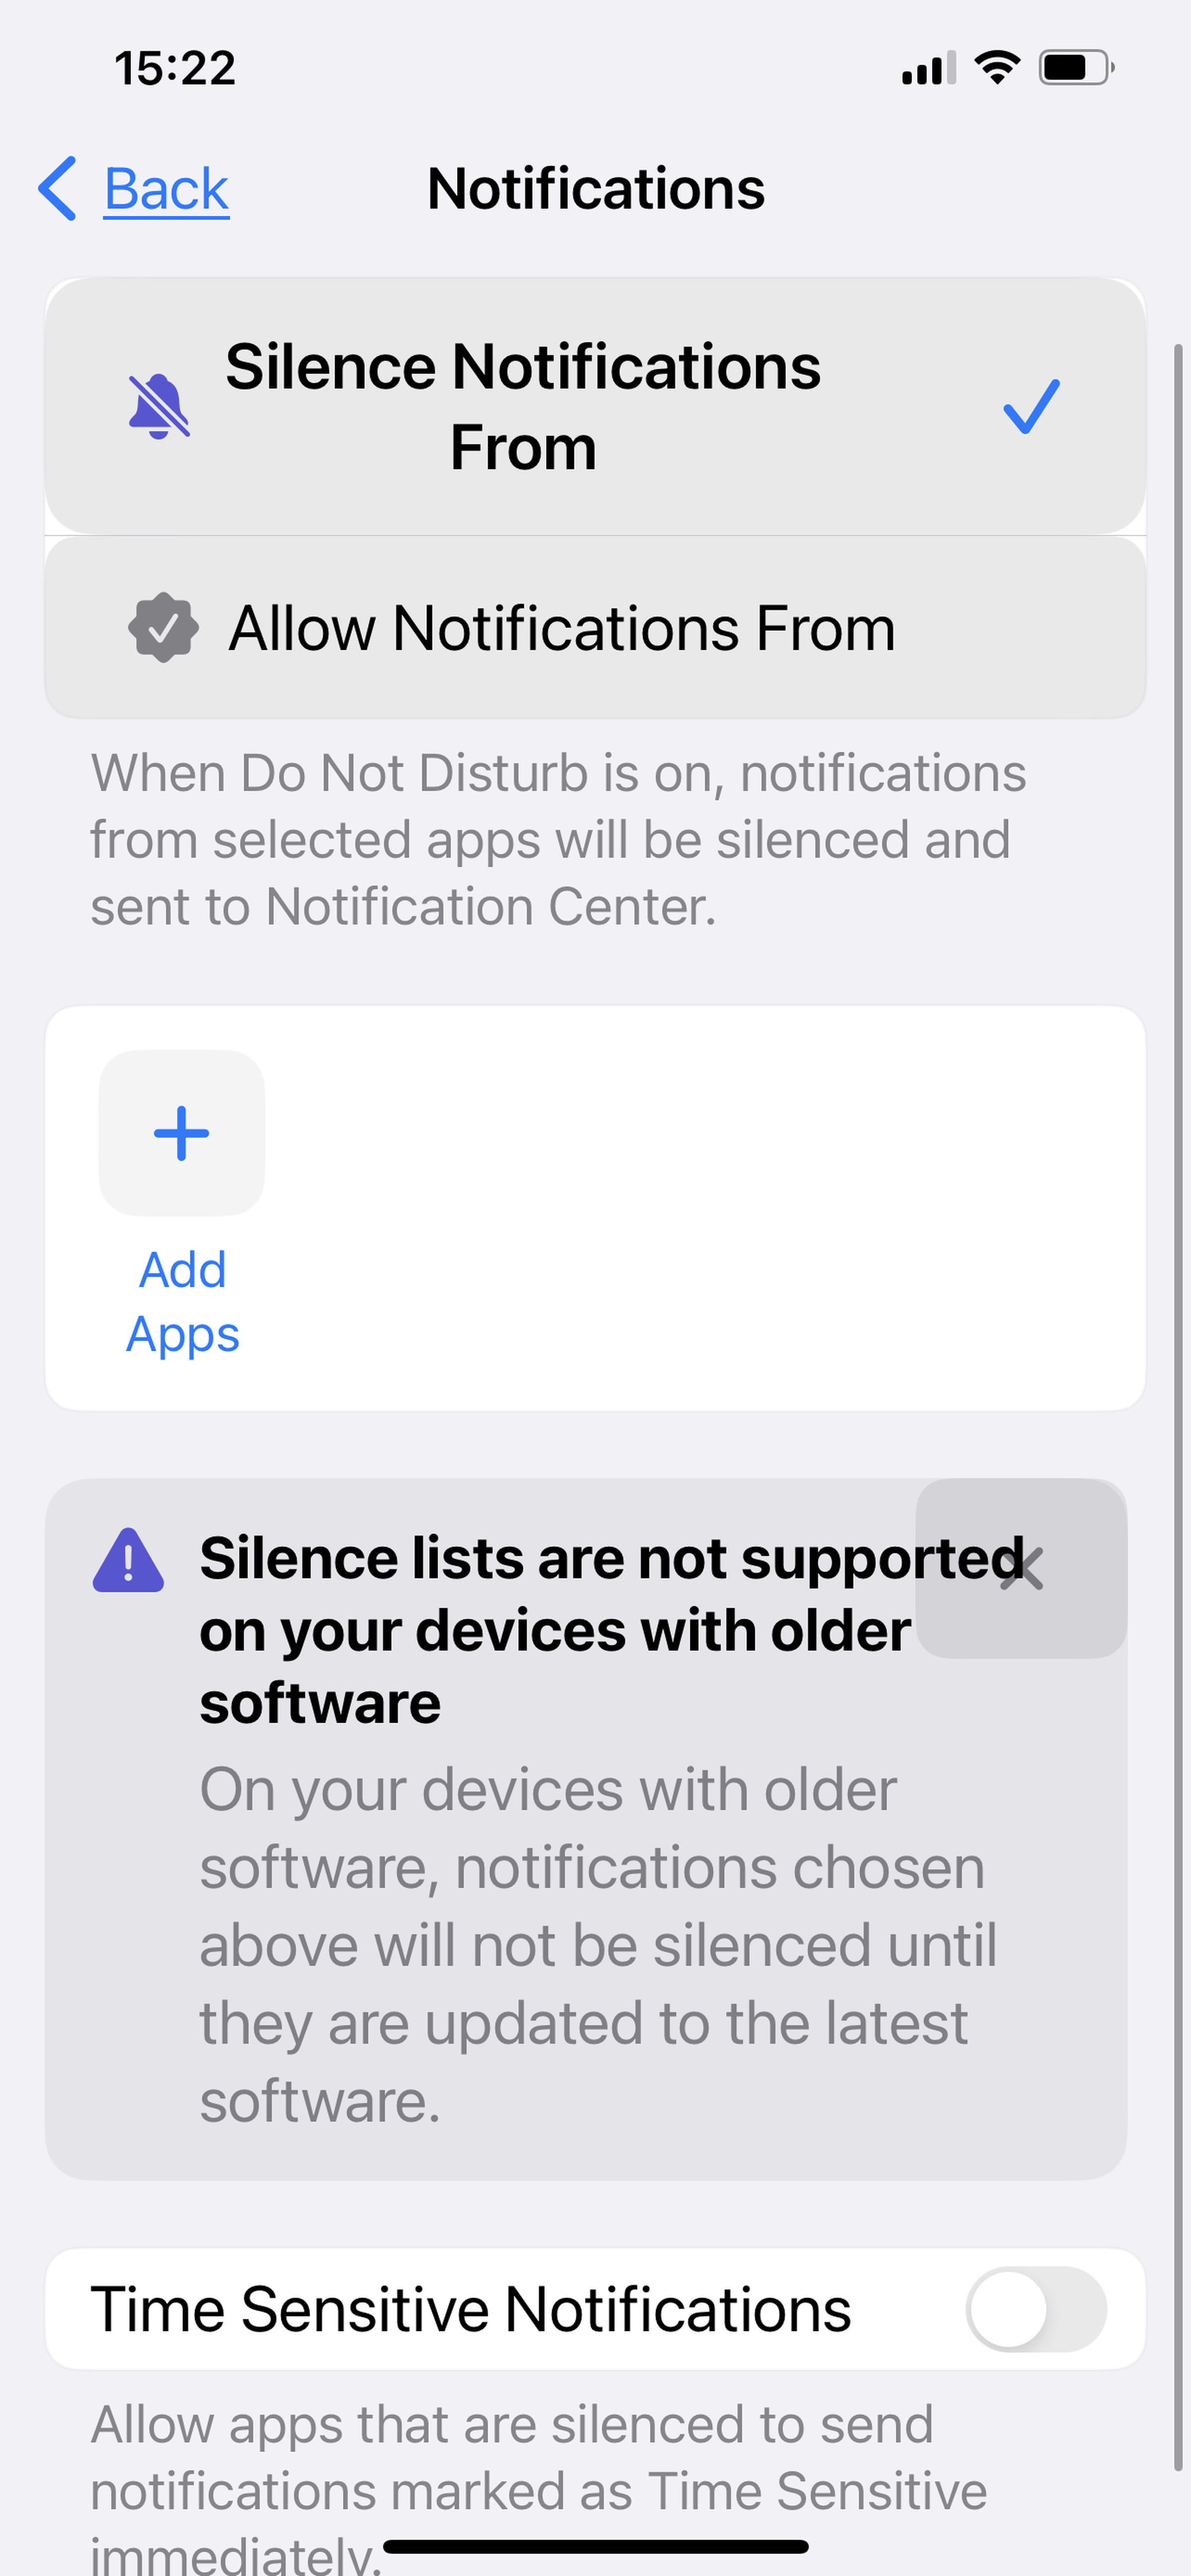 Silence notifications screen in Focus modes